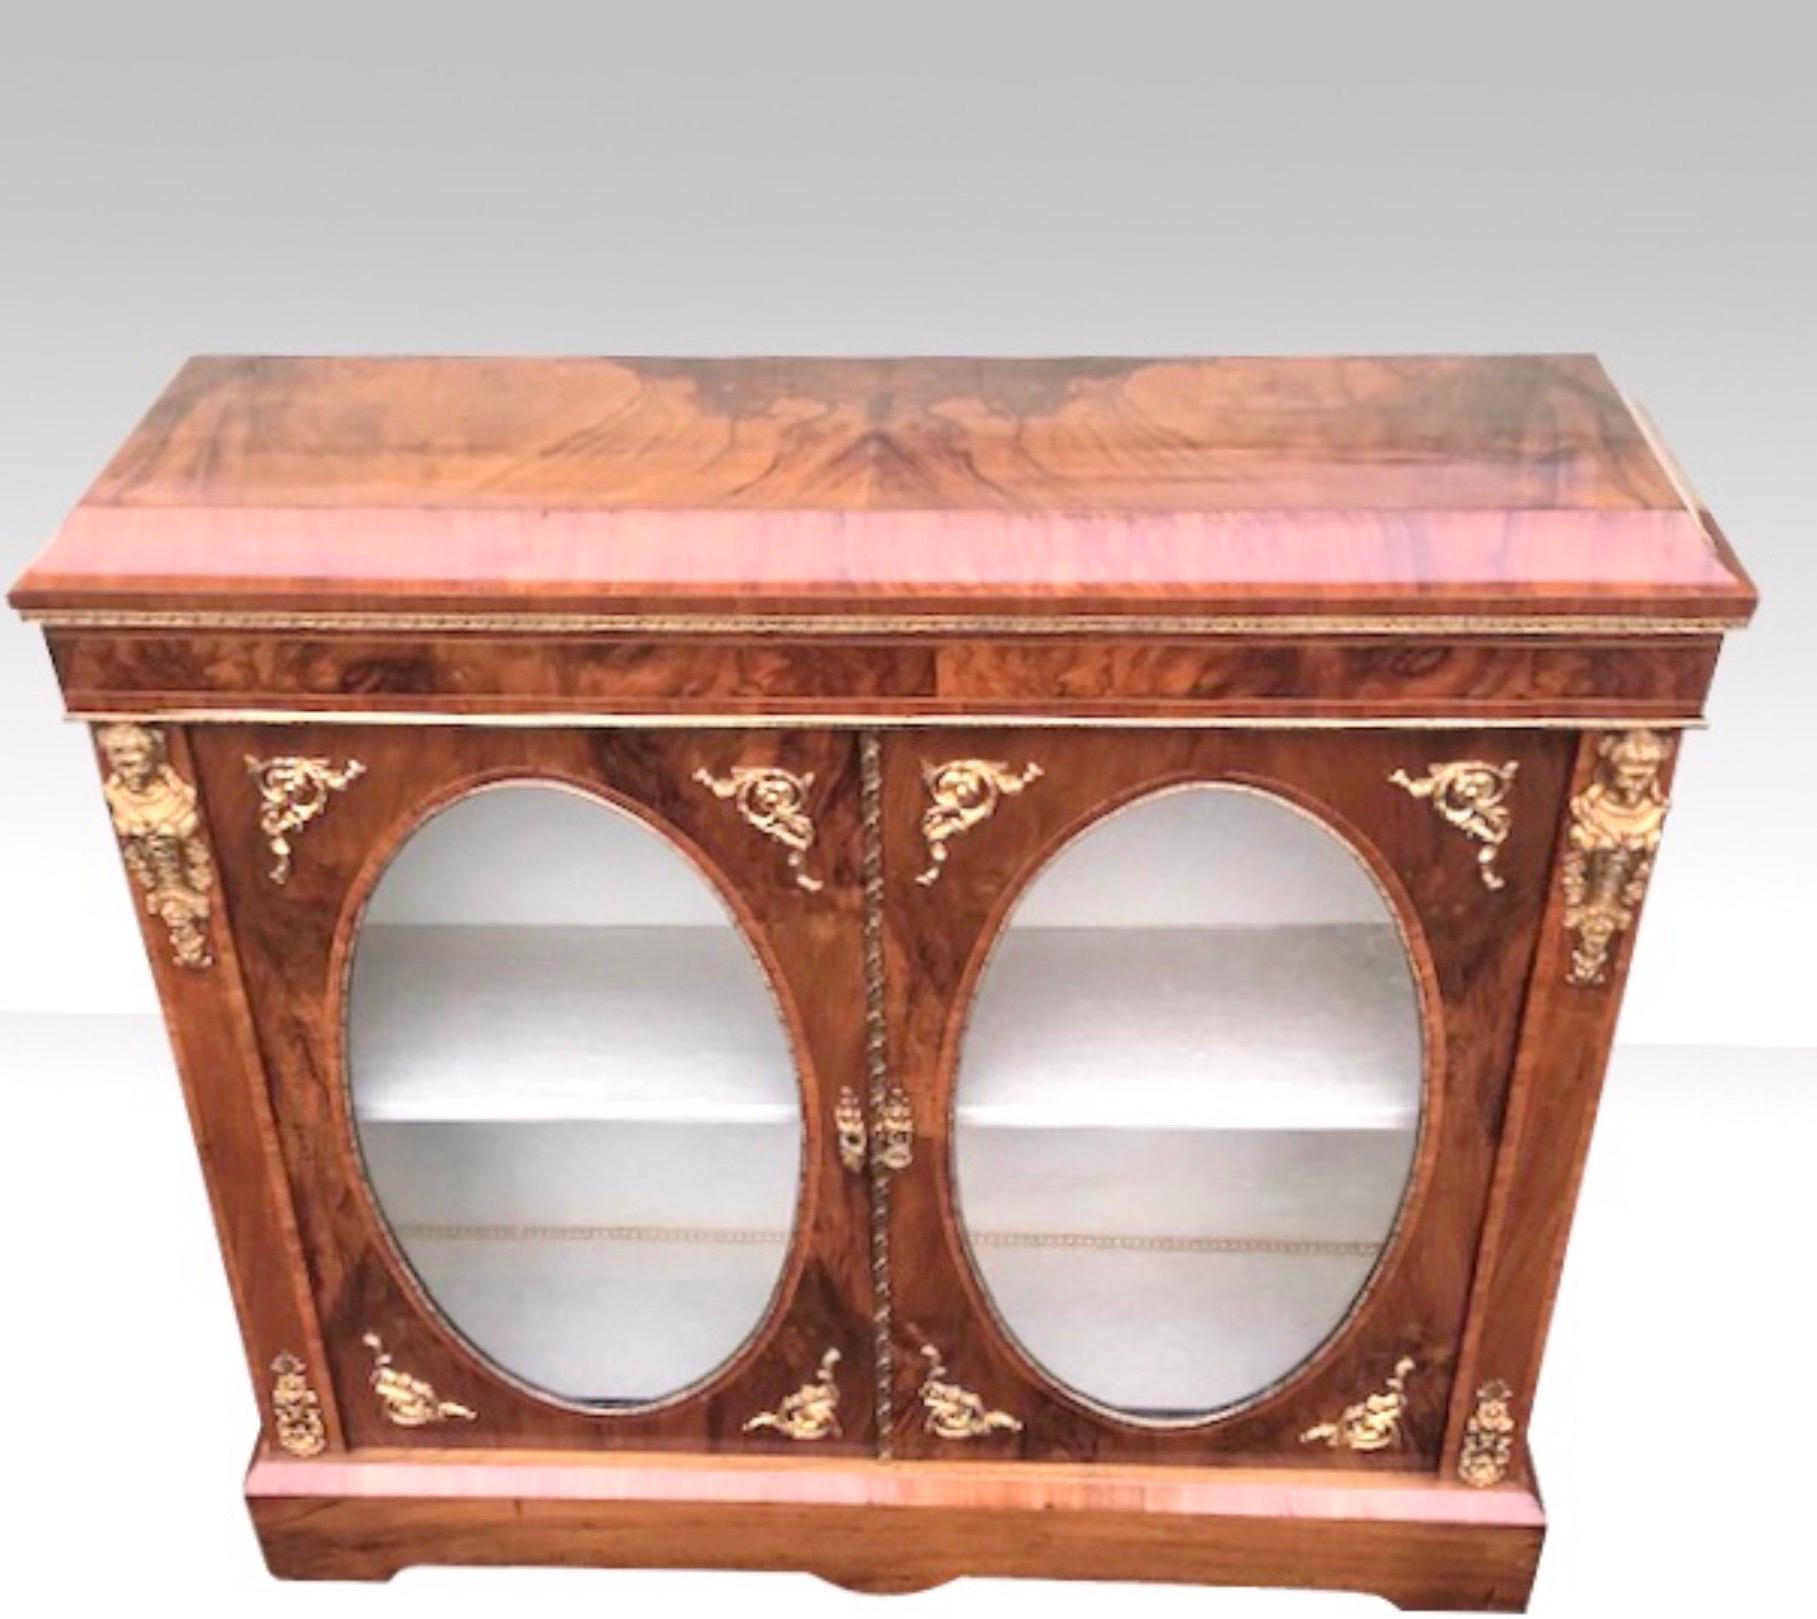 Figured Inlaid Walnut Ormolu Mounted Two Doored Antique Victorian Pier Cabinet In Good Condition For Sale In Antrim, GB